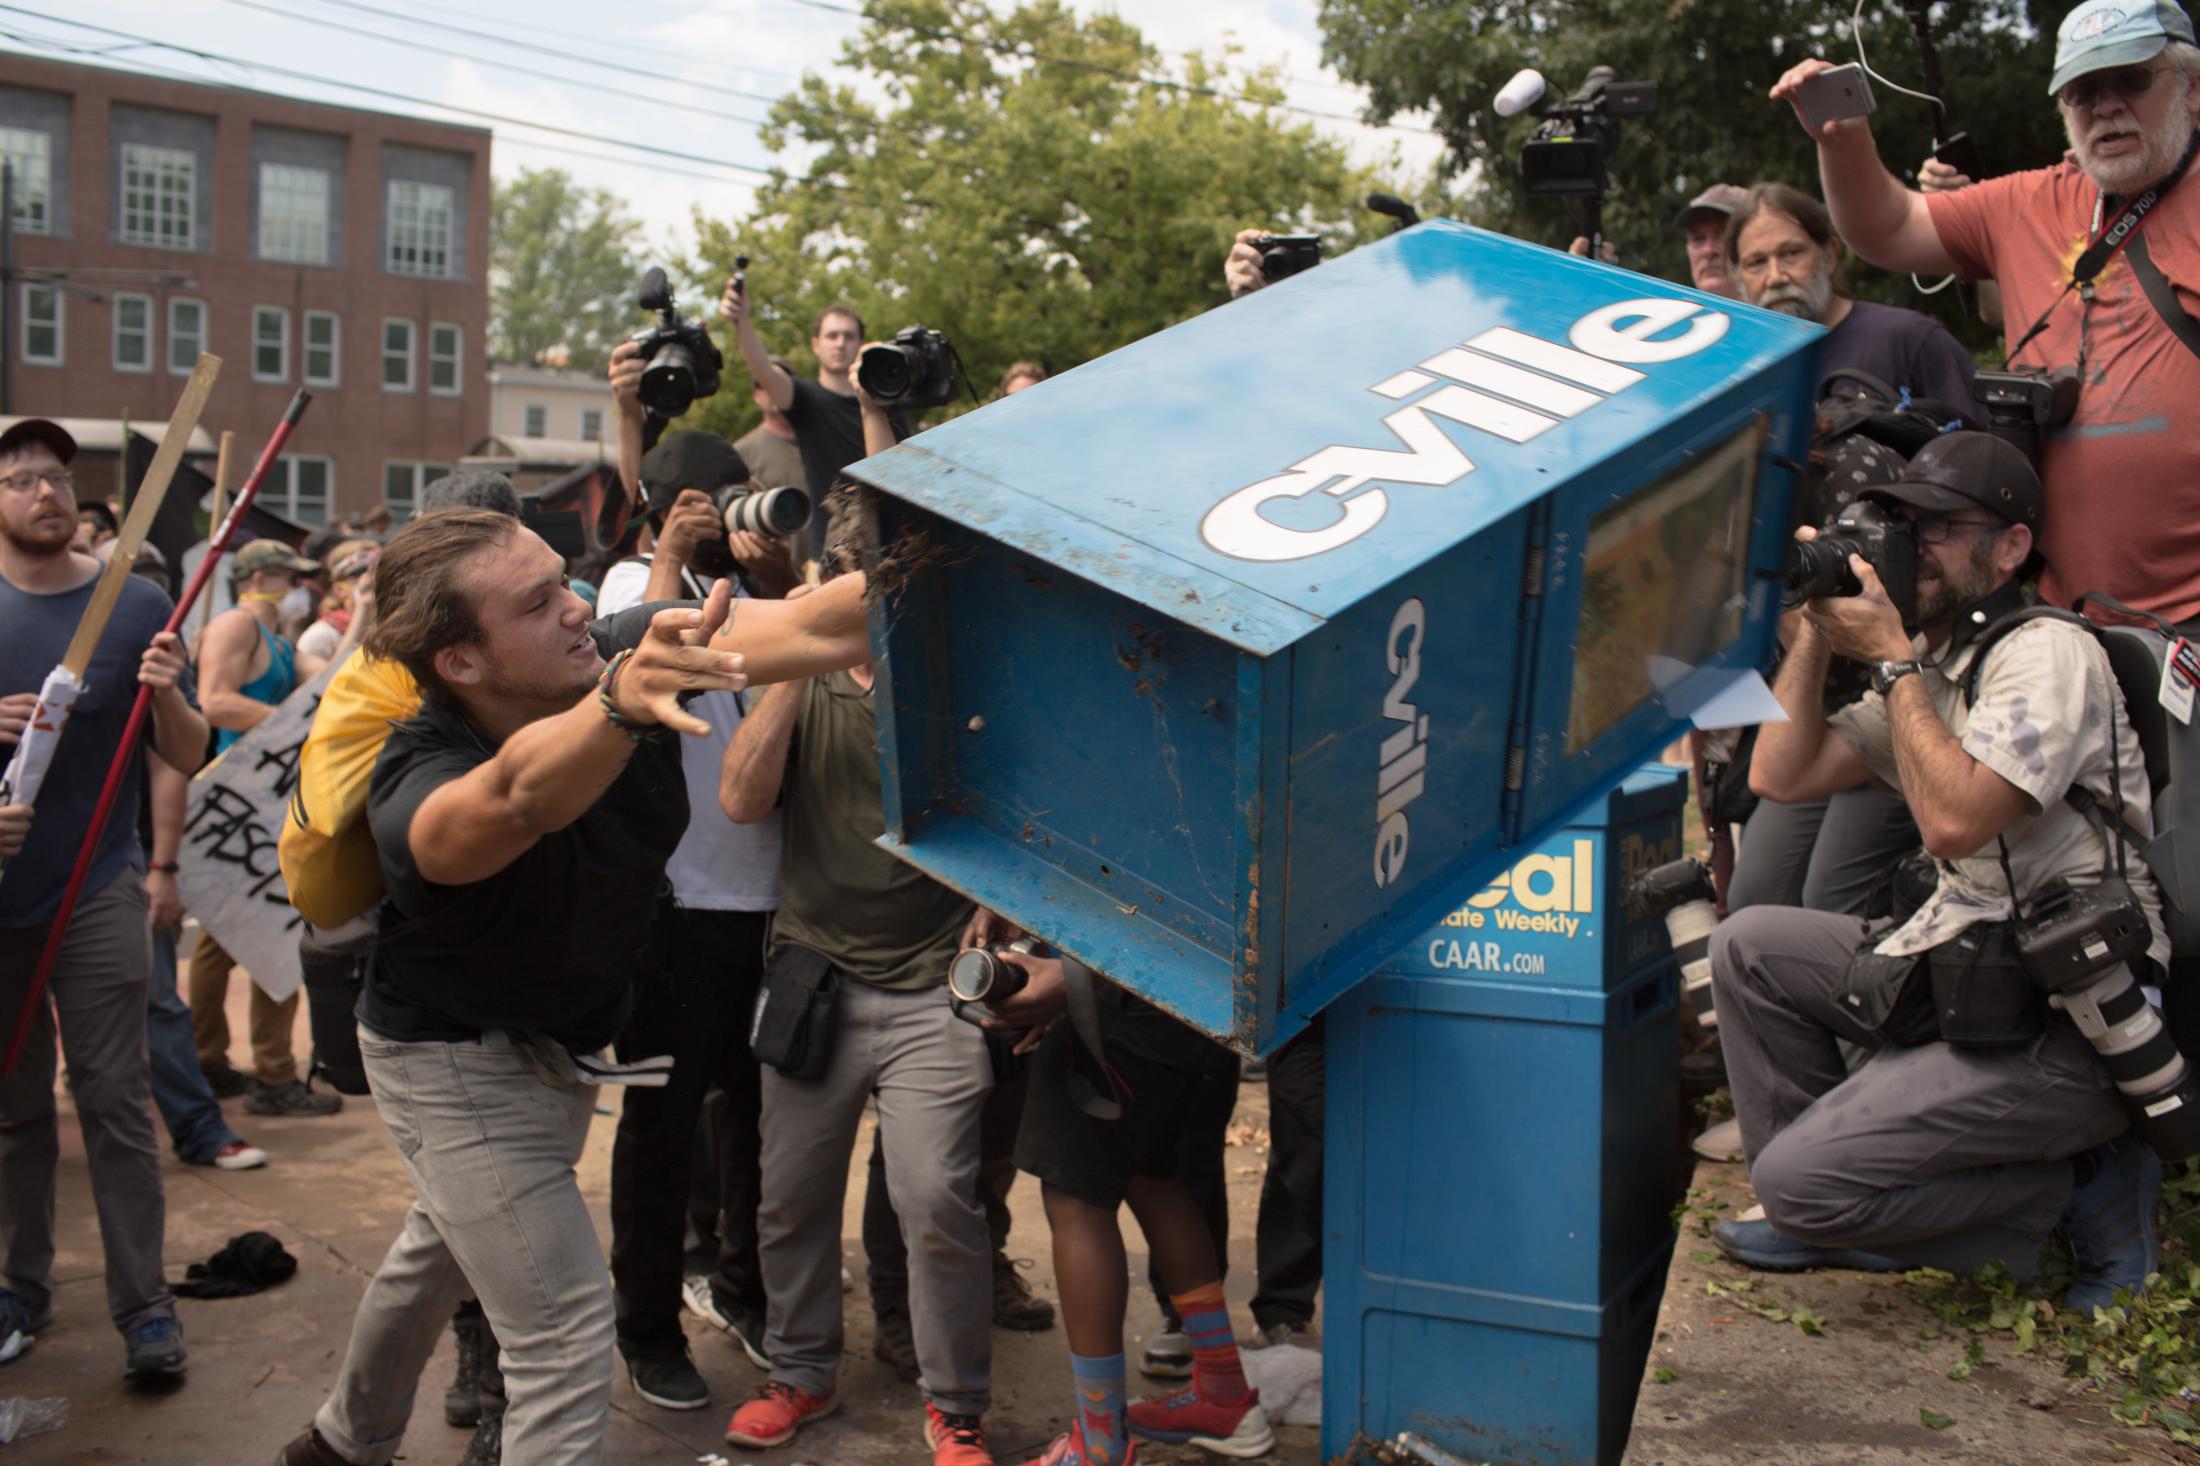 Charlottesville - An anti-fascist protester throws a newspaper box at white...